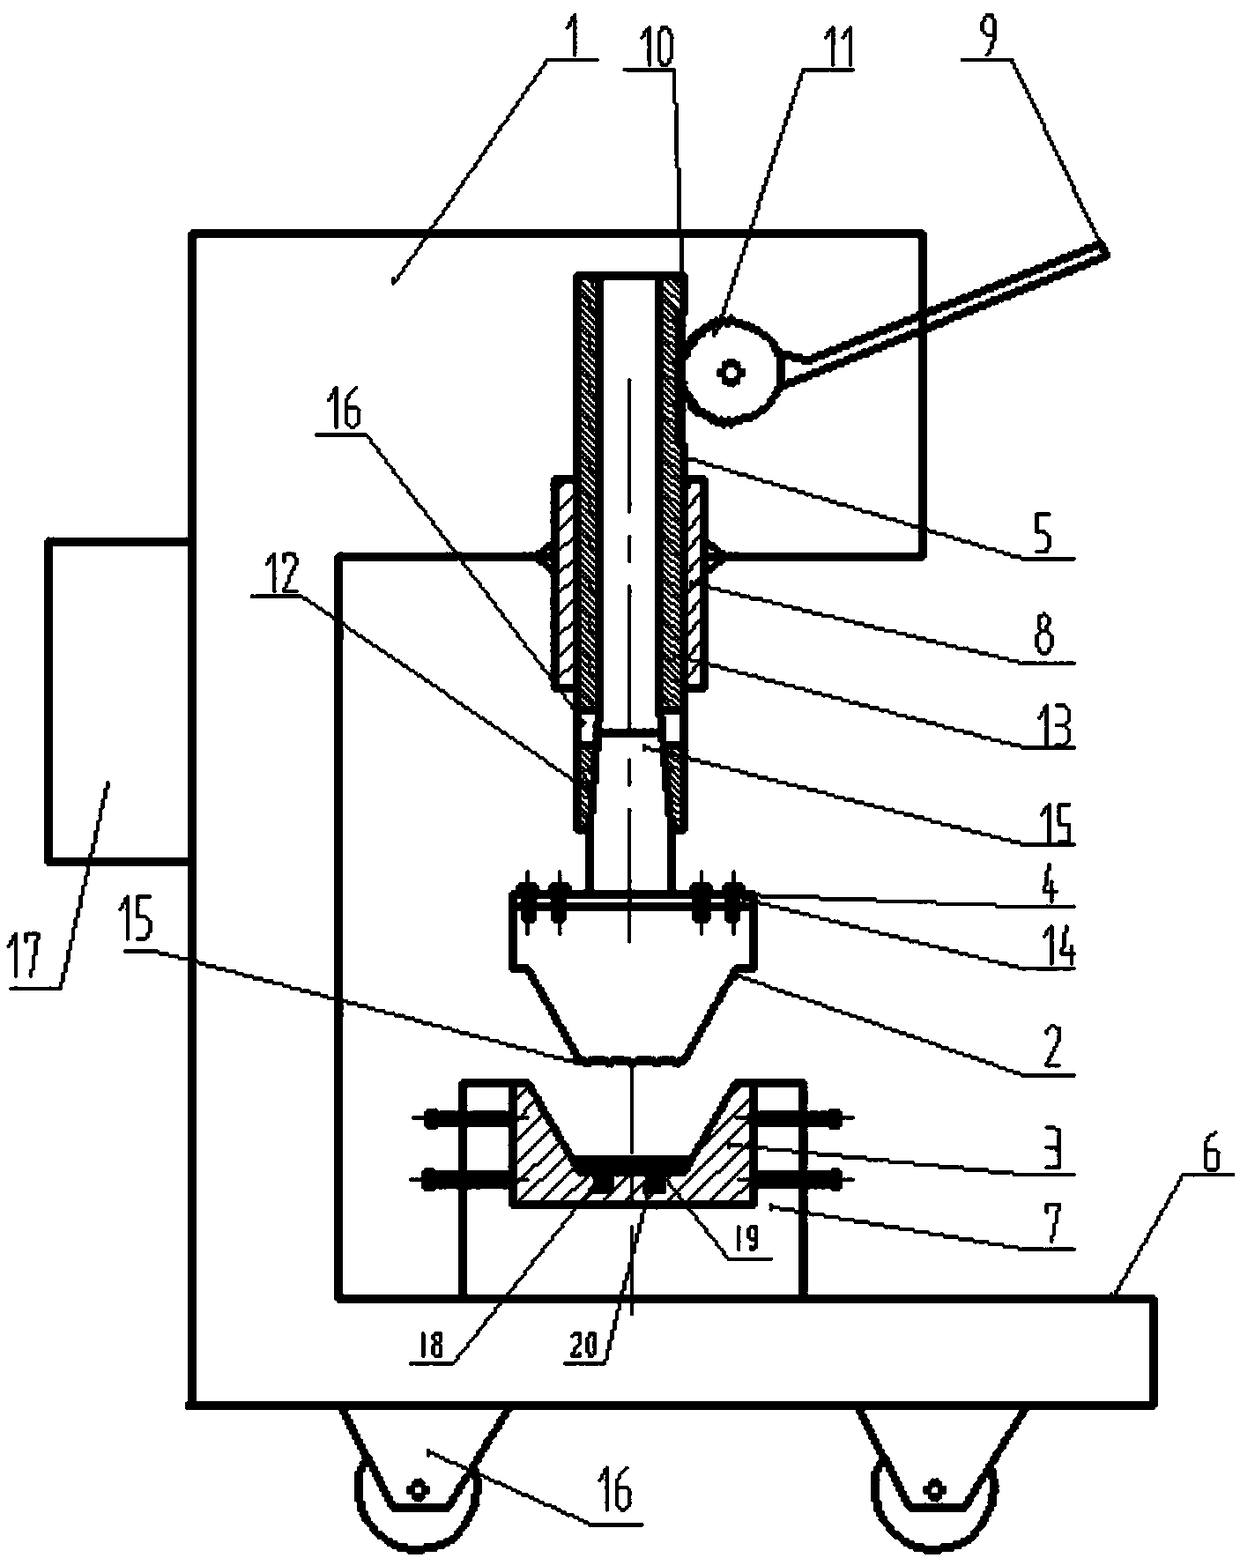 Compression system based on gear occlusion transmission